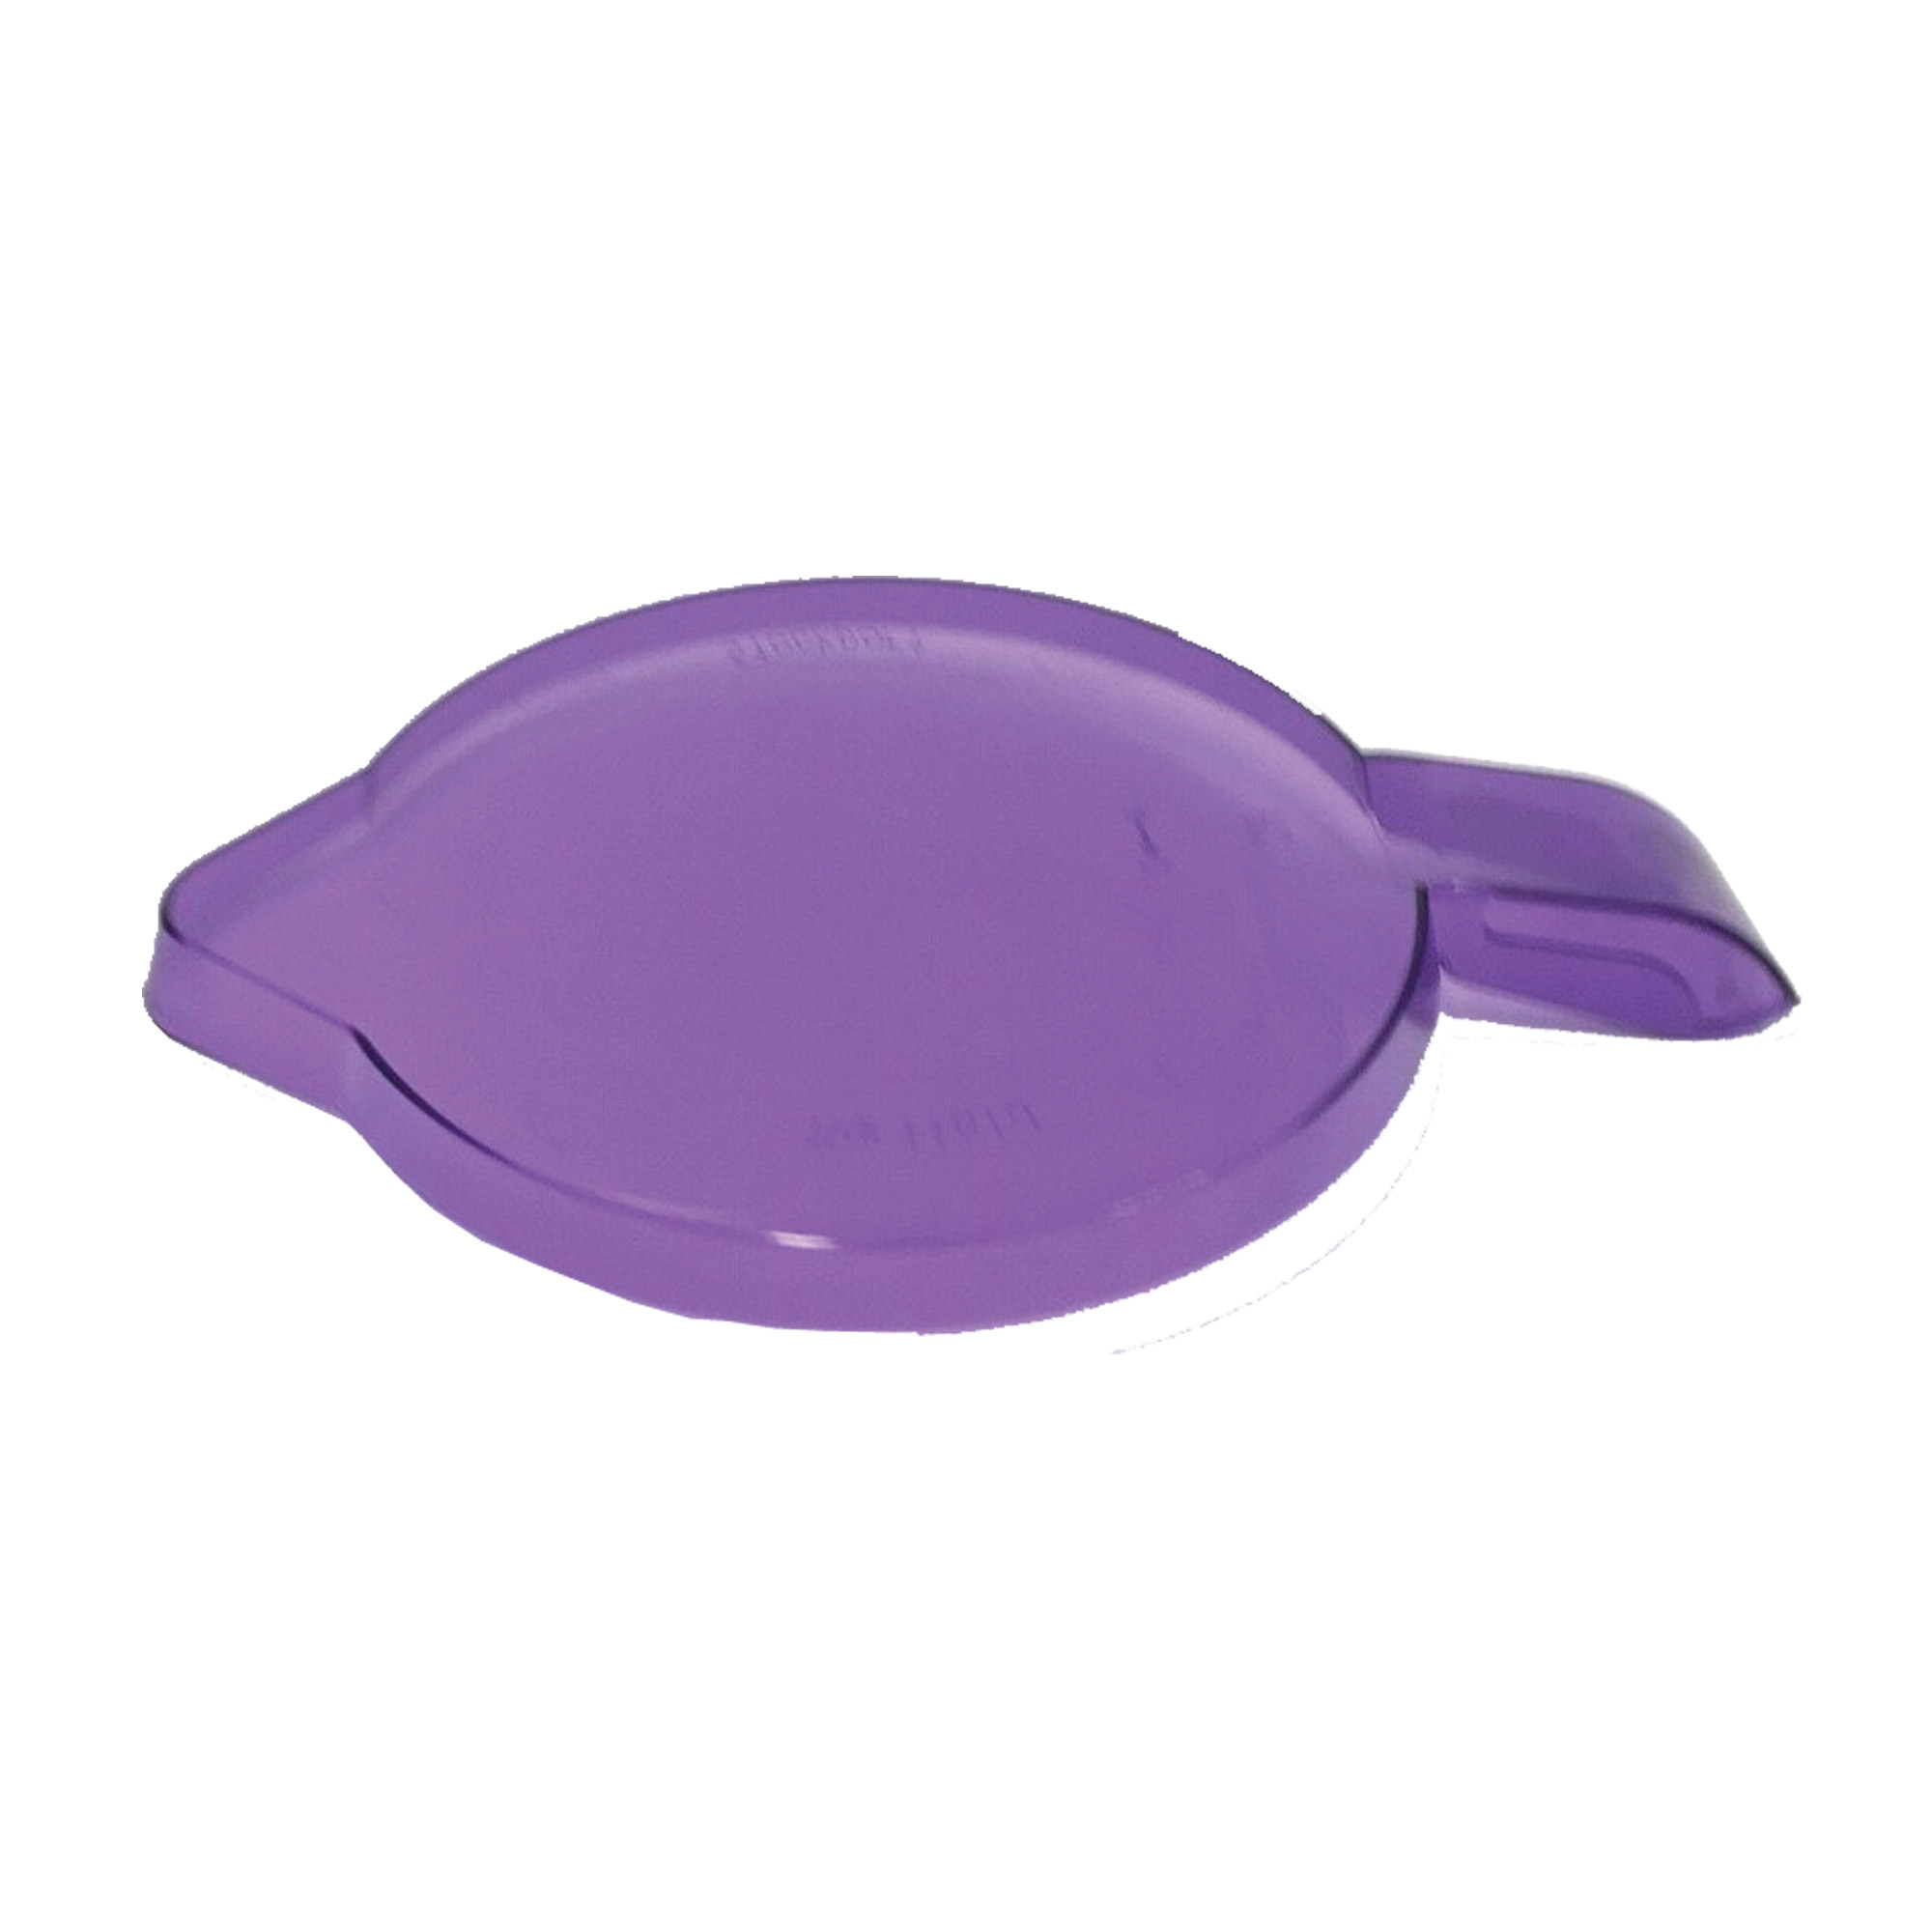 750ml Jug Lid Copolyester (to fit CB-8064) PURPLE - EACH